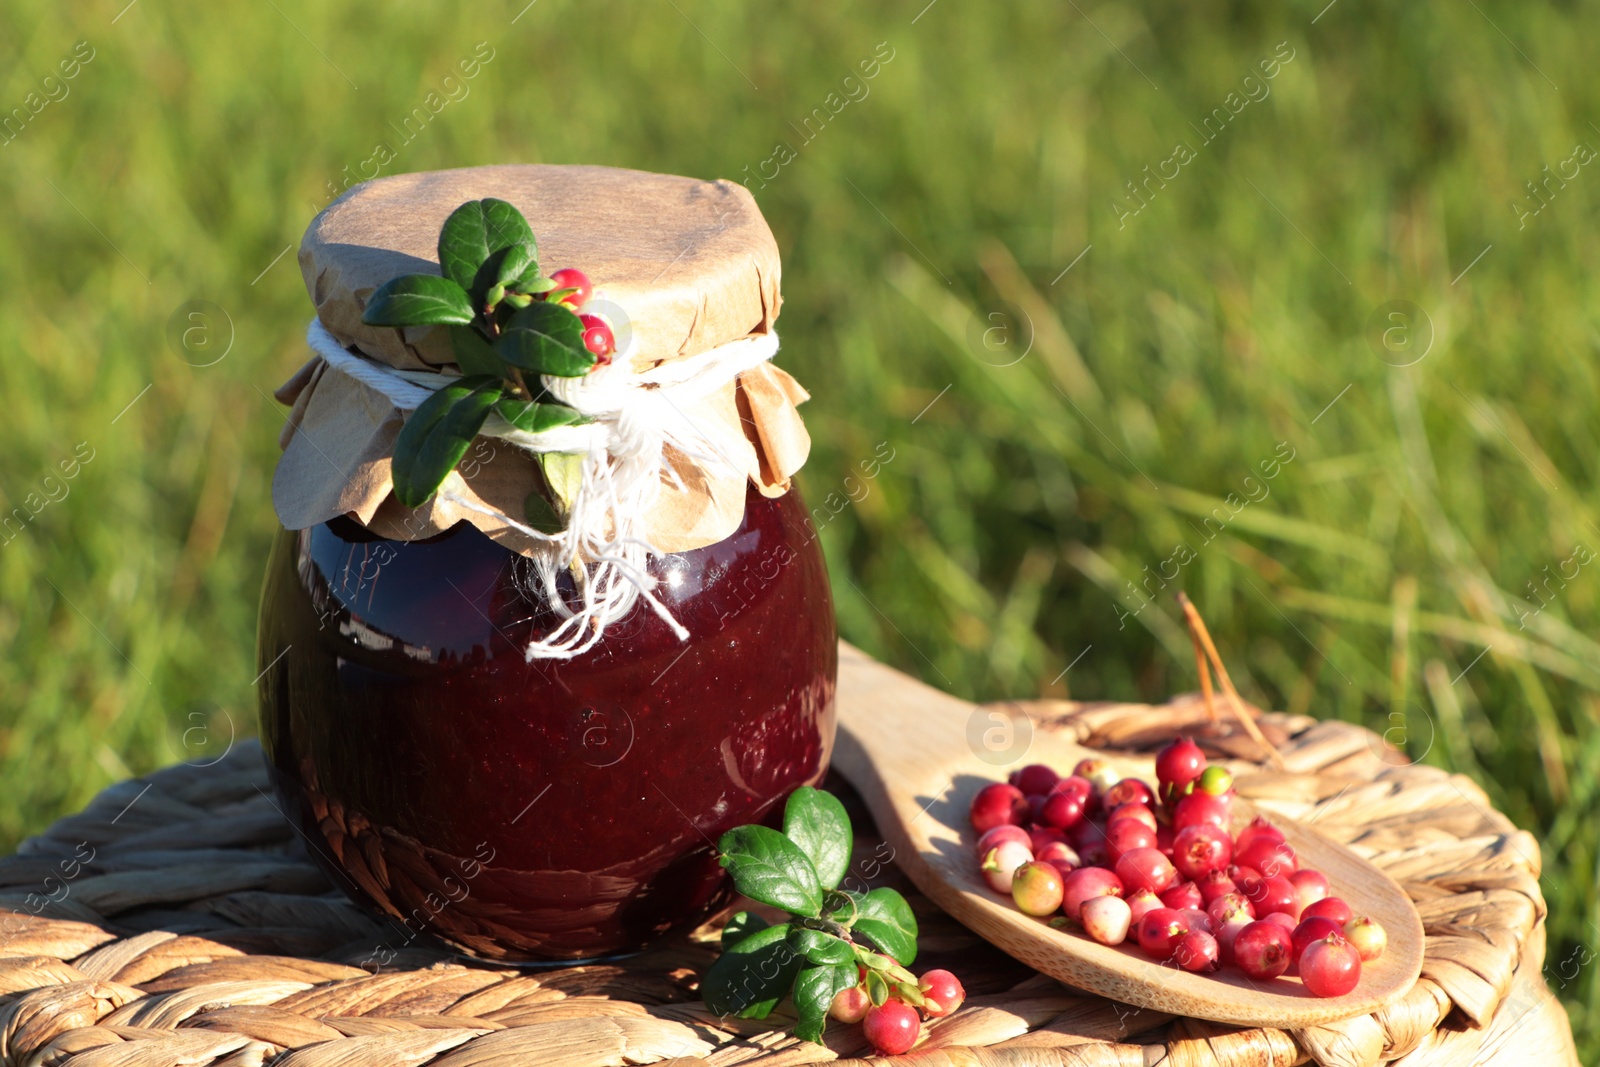 Photo of Jar of delicious lingonberry jam and red berries on wicker basket outdoors, space for text